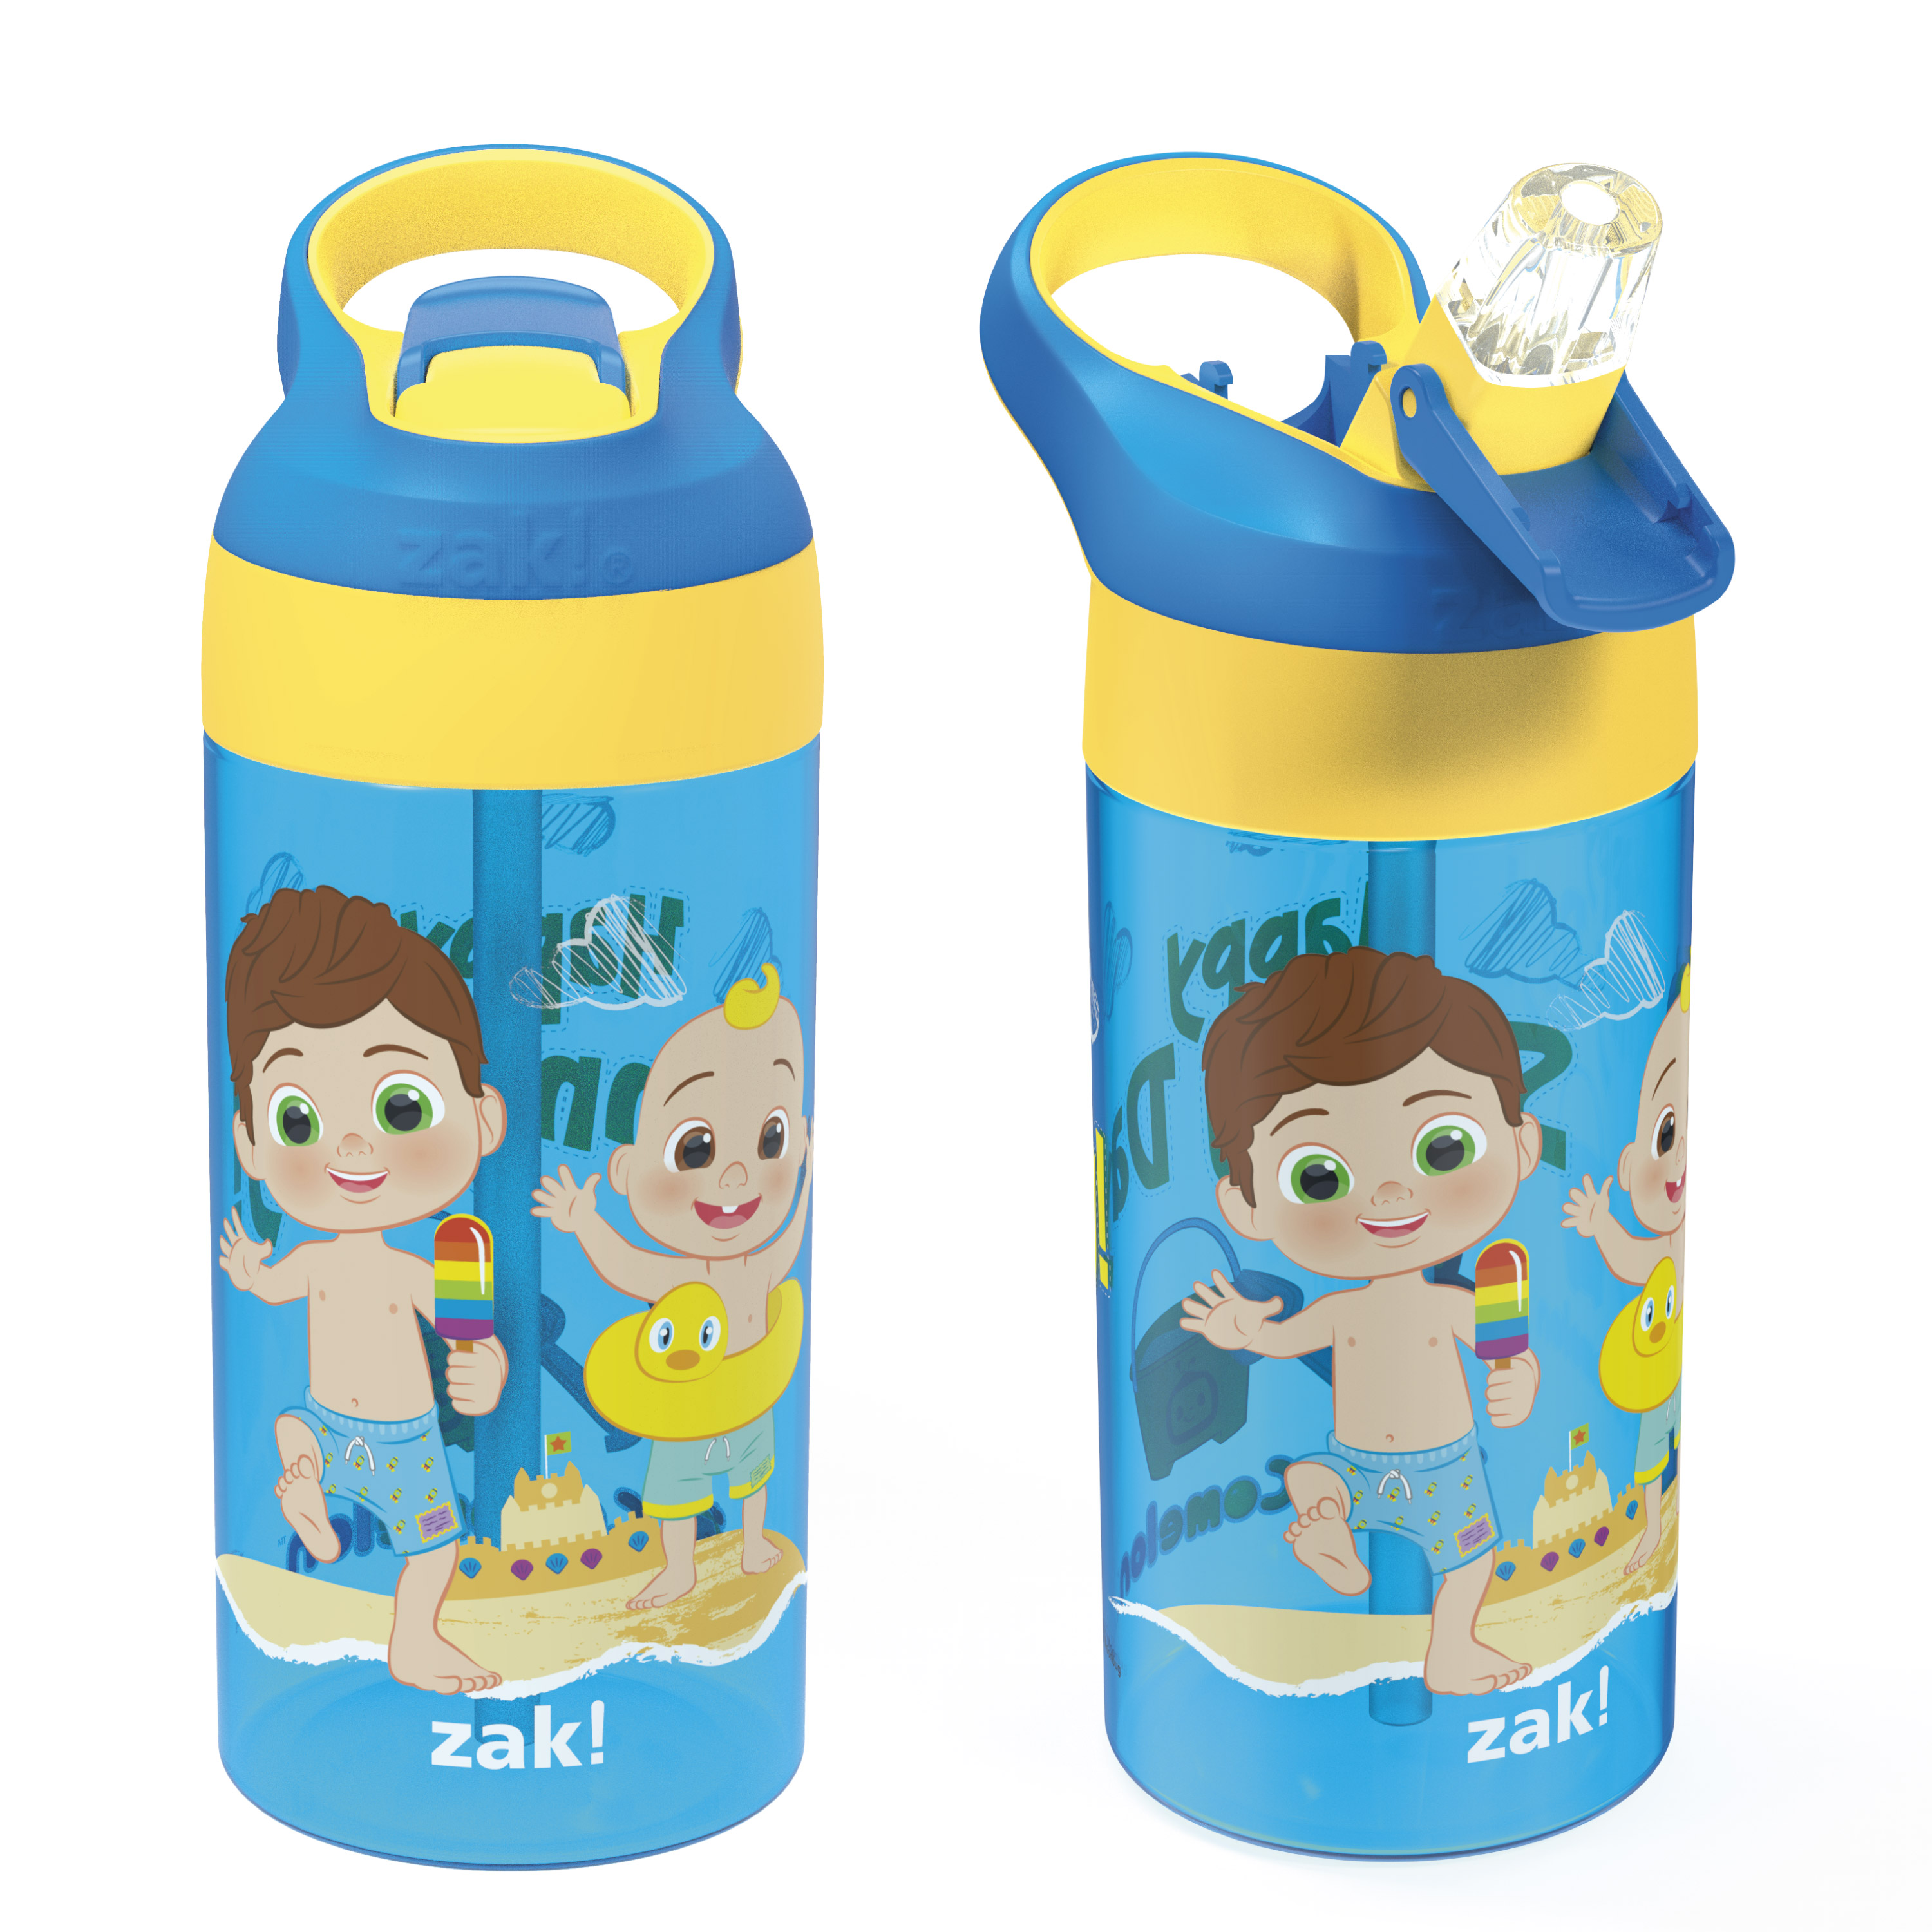 CoComelon 17.5 ounce Water Bottle, Happy, Sunny Day!, 2-piece set slideshow image 1